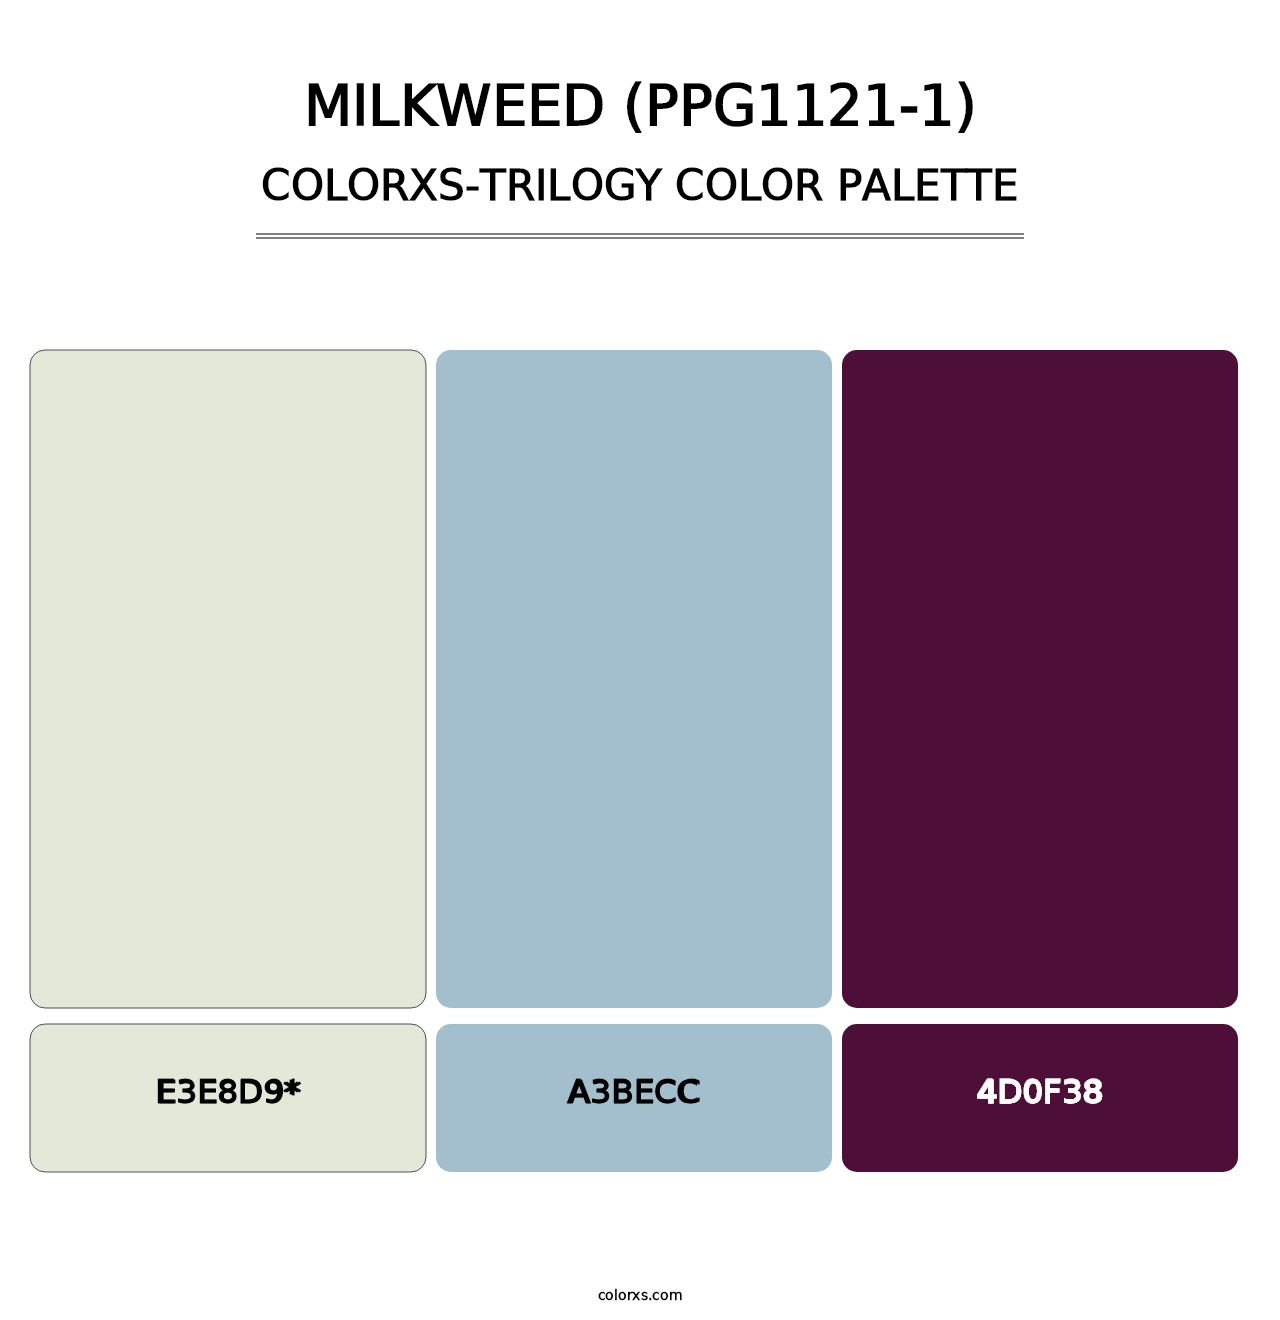 Milkweed (PPG1121-1) - Colorxs Trilogy Palette